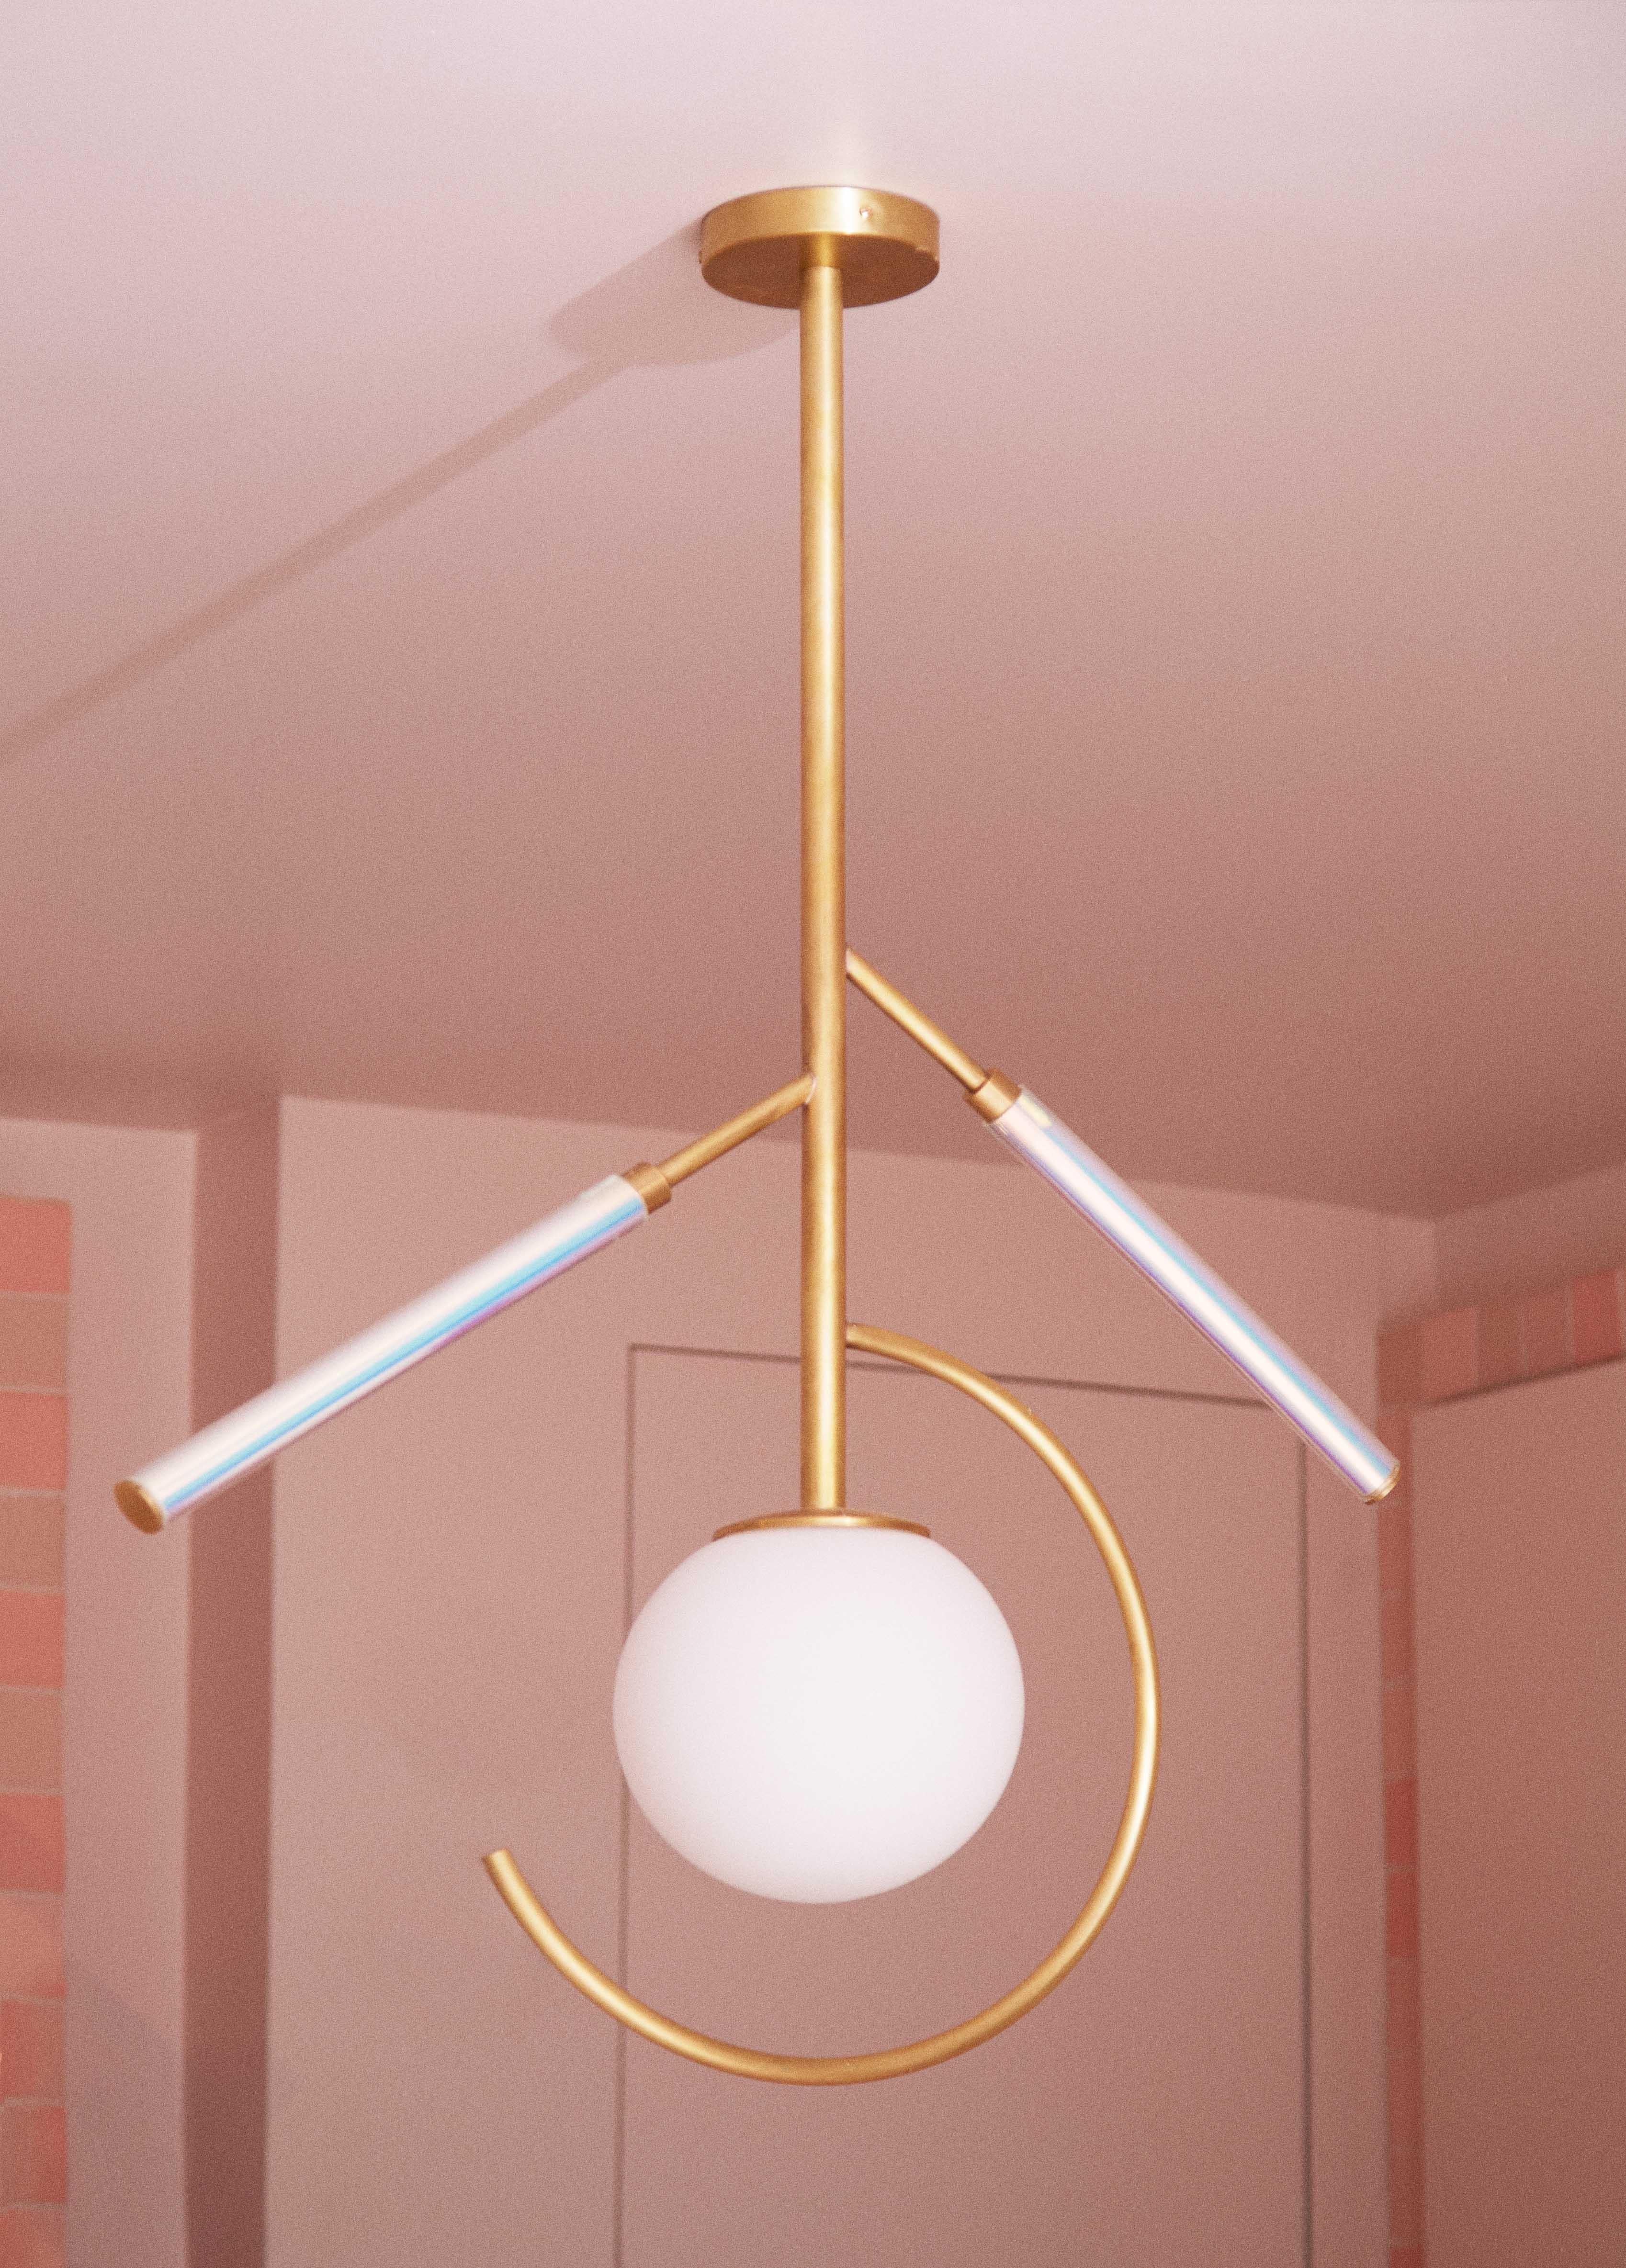 Hype Pendant Lamp by Patricia Bustos de la Torre
Dimensions: D 20 x W 75 x H 101 cm.
Materials: White opal glass, transparent methacrylate tubes, iridescent vinyl and brass.

“Hype” lamp is an exciting and vitaminic jewel that combines fluorescents